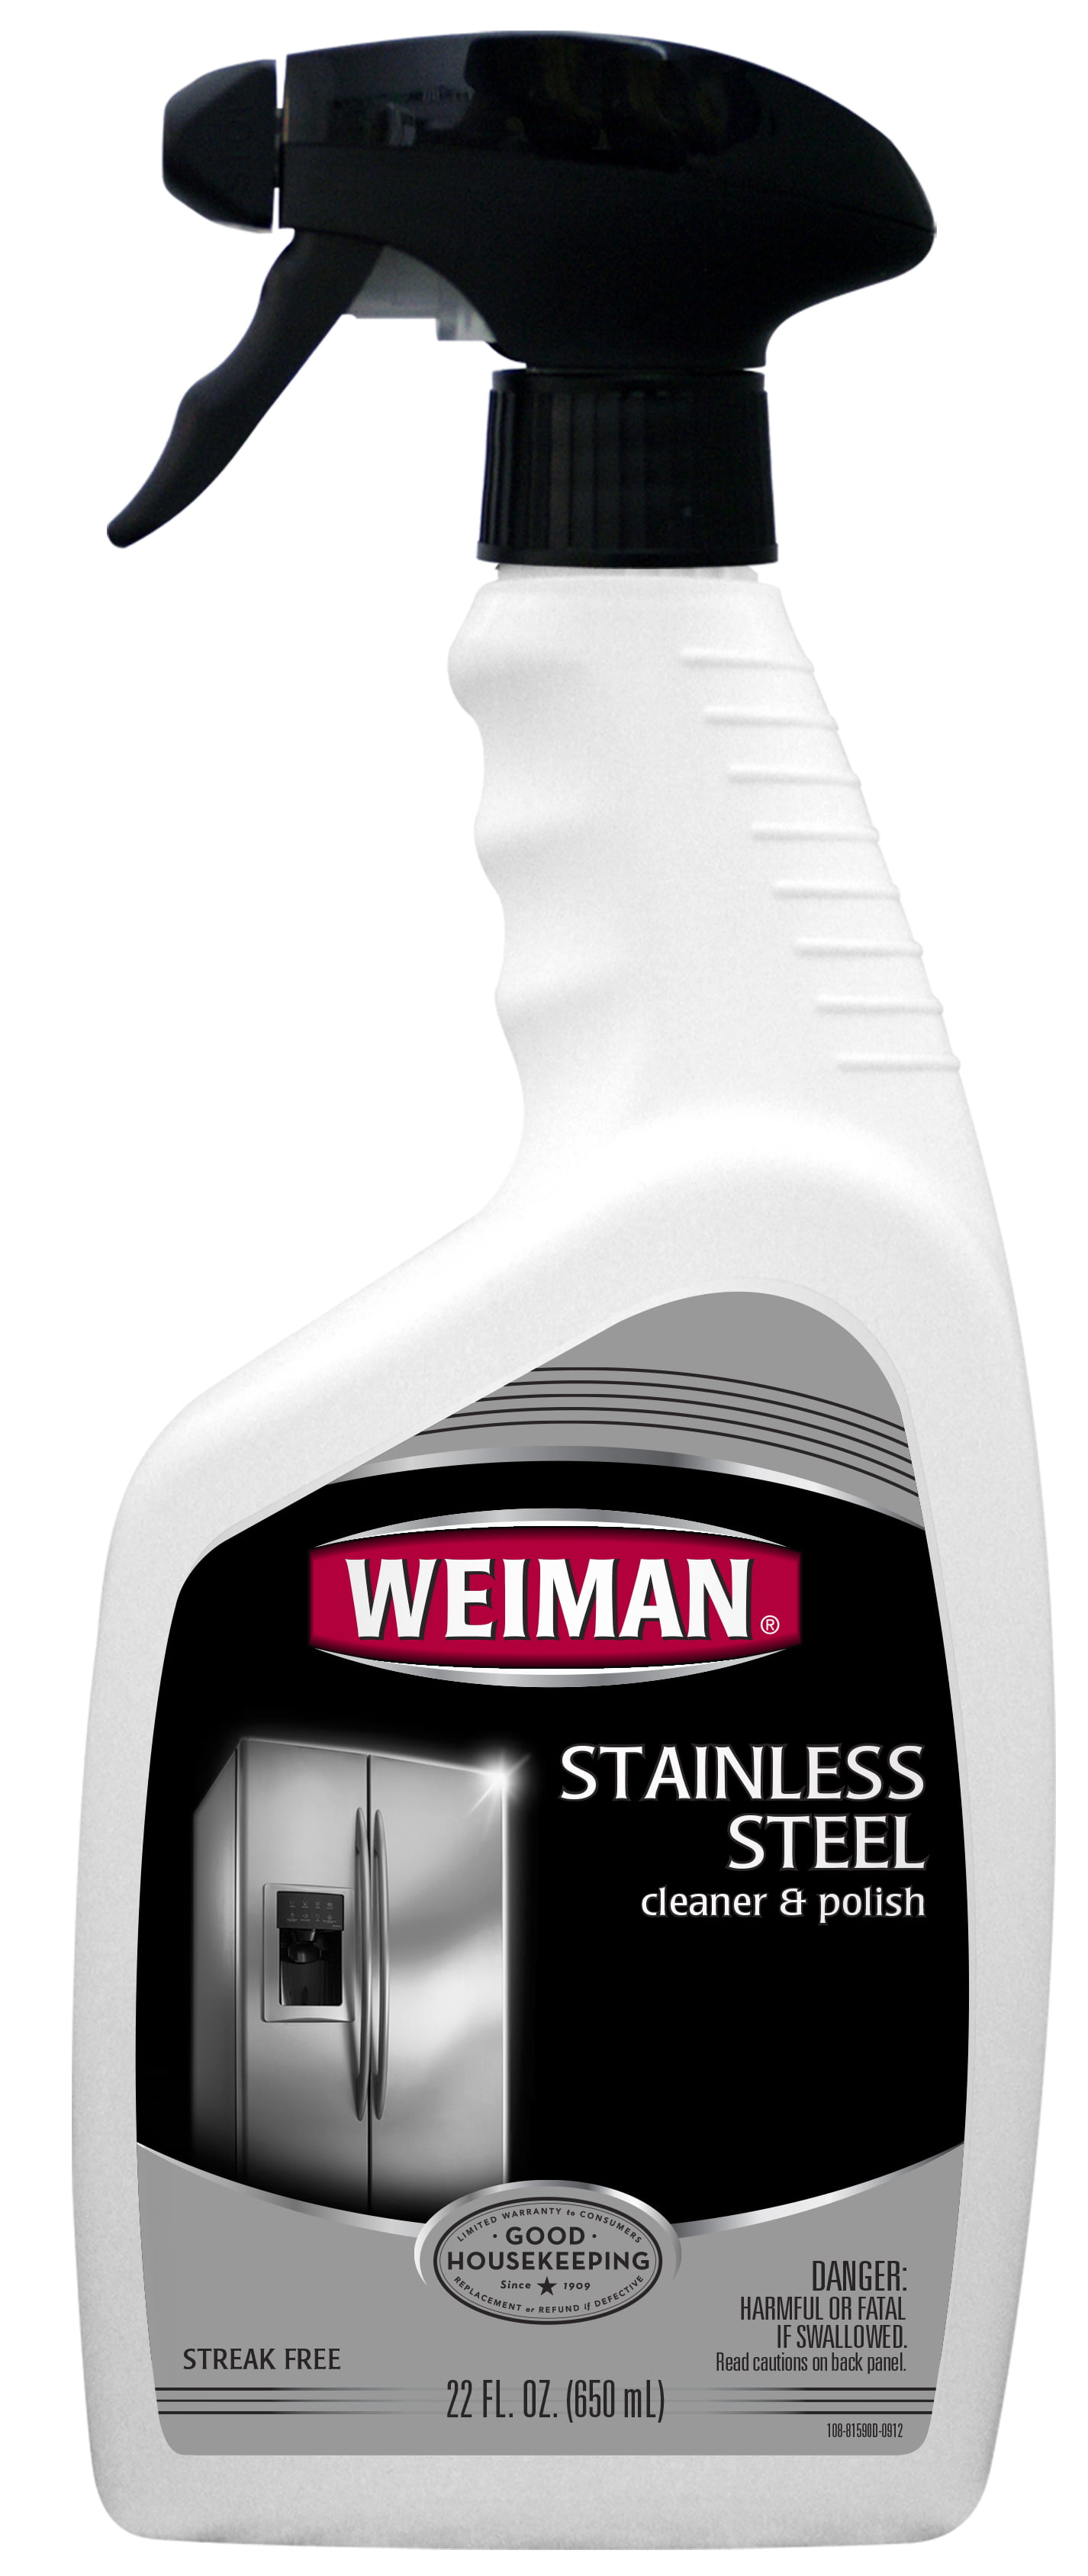 Weiman Stainless Steel Cleaner & Polish, 22 Oz - Walmart.com - Walmart.com Stainless Steel Cleaner At Walmart